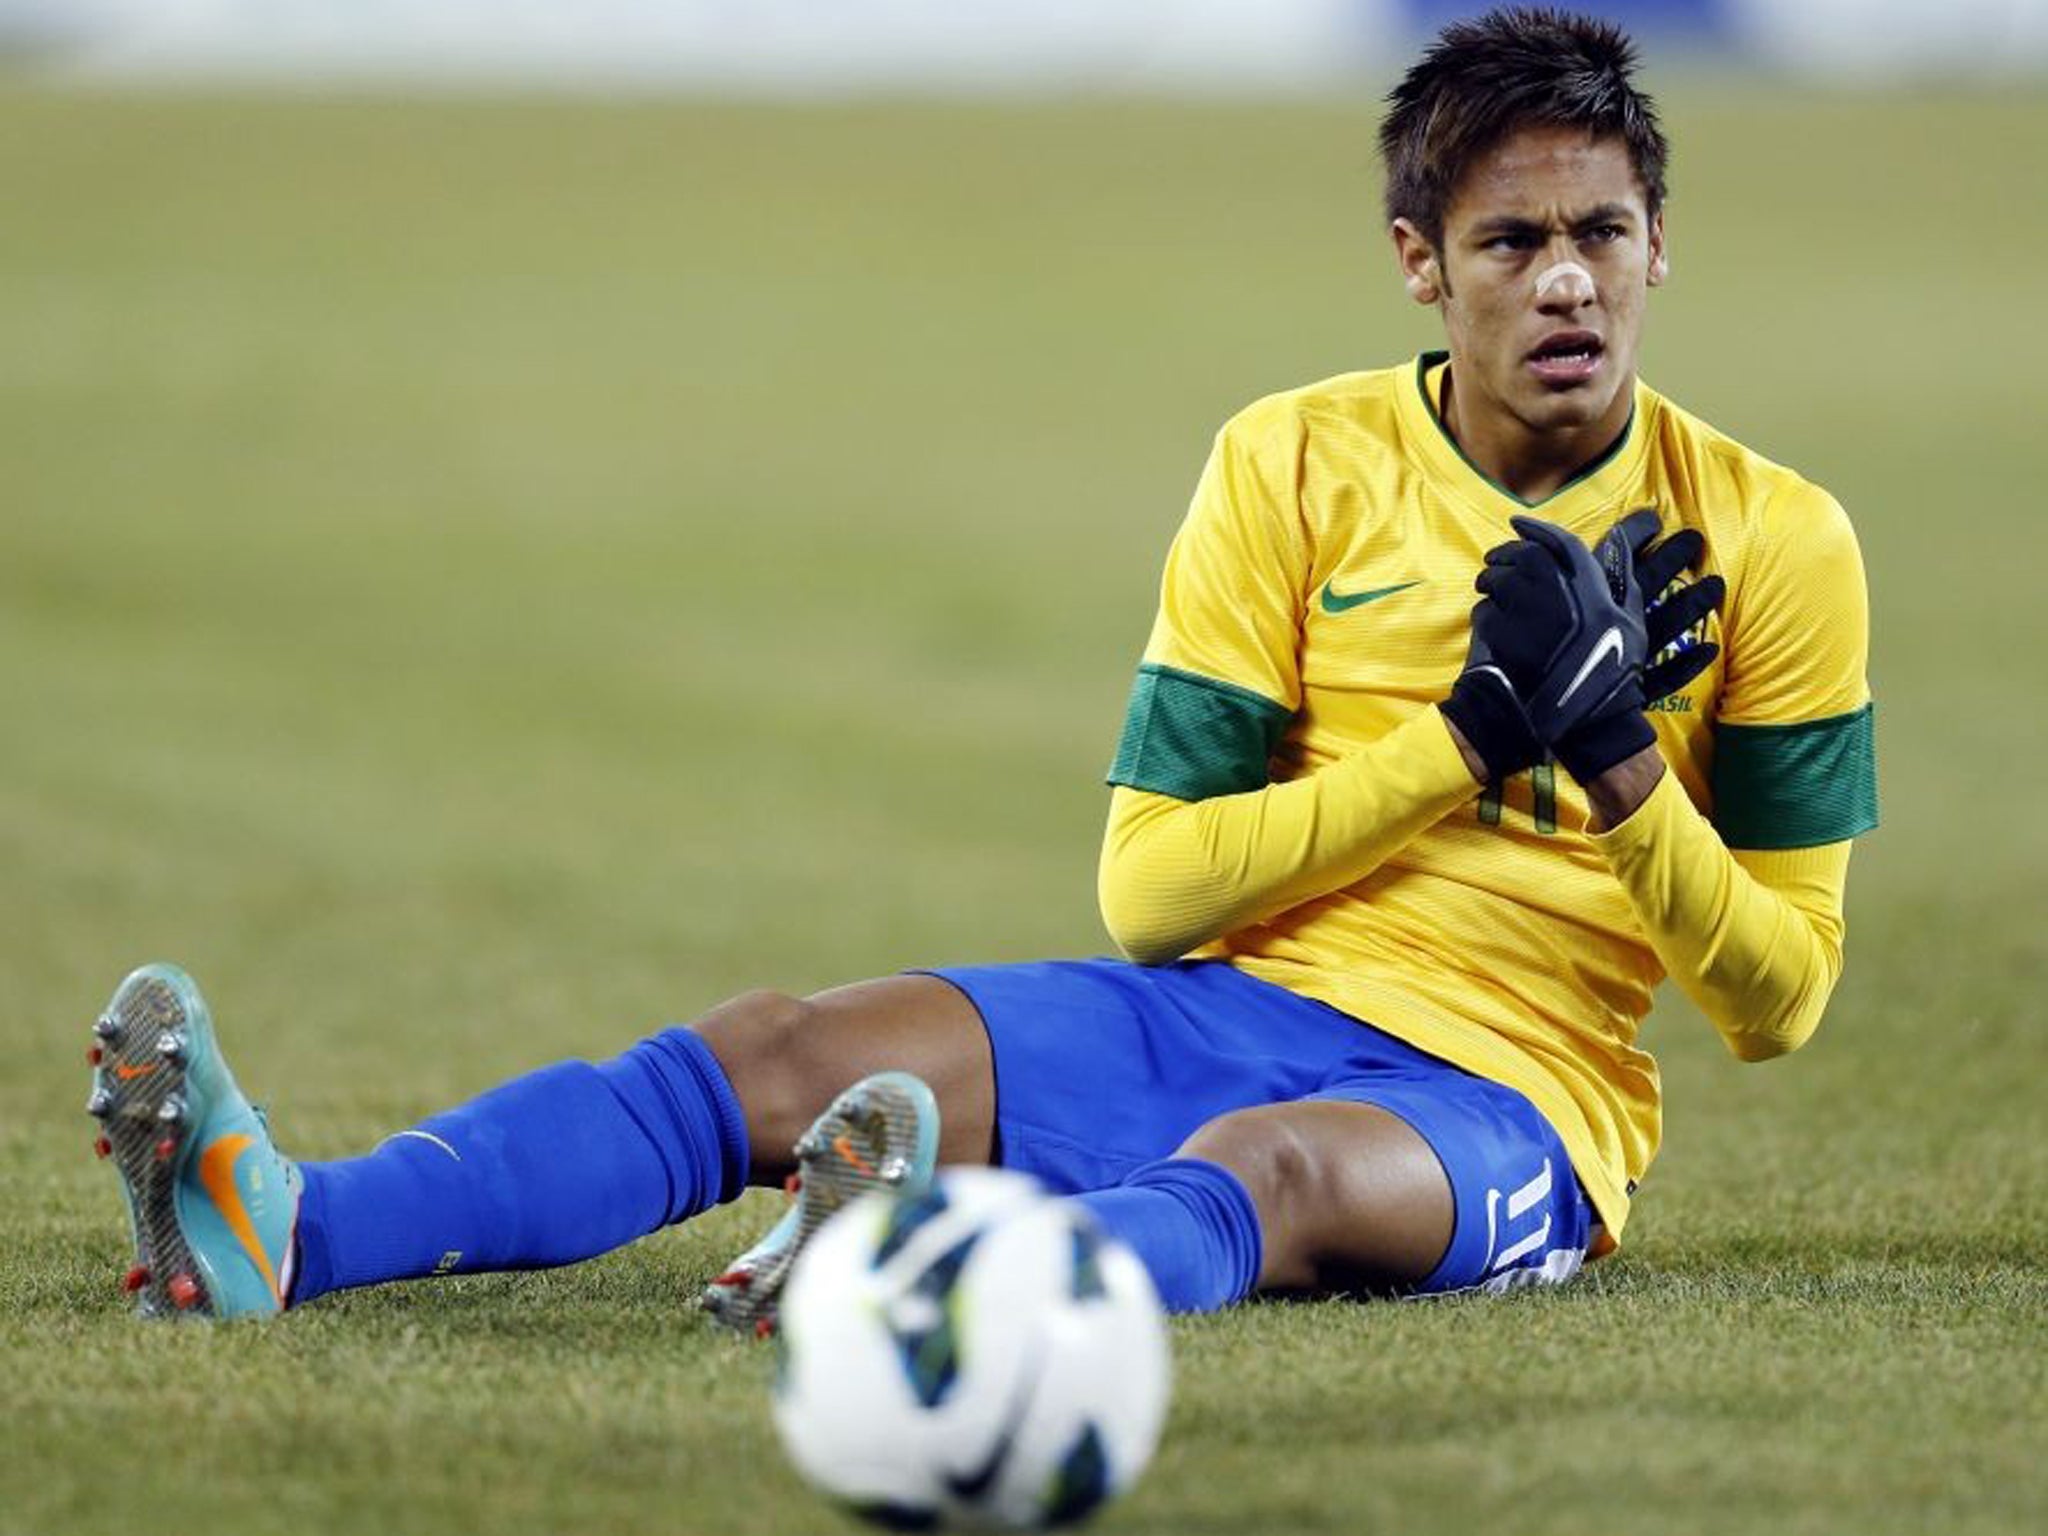 Neymar blamed an “unstable” pitch after the Brazilian missed a penalty against Colombia